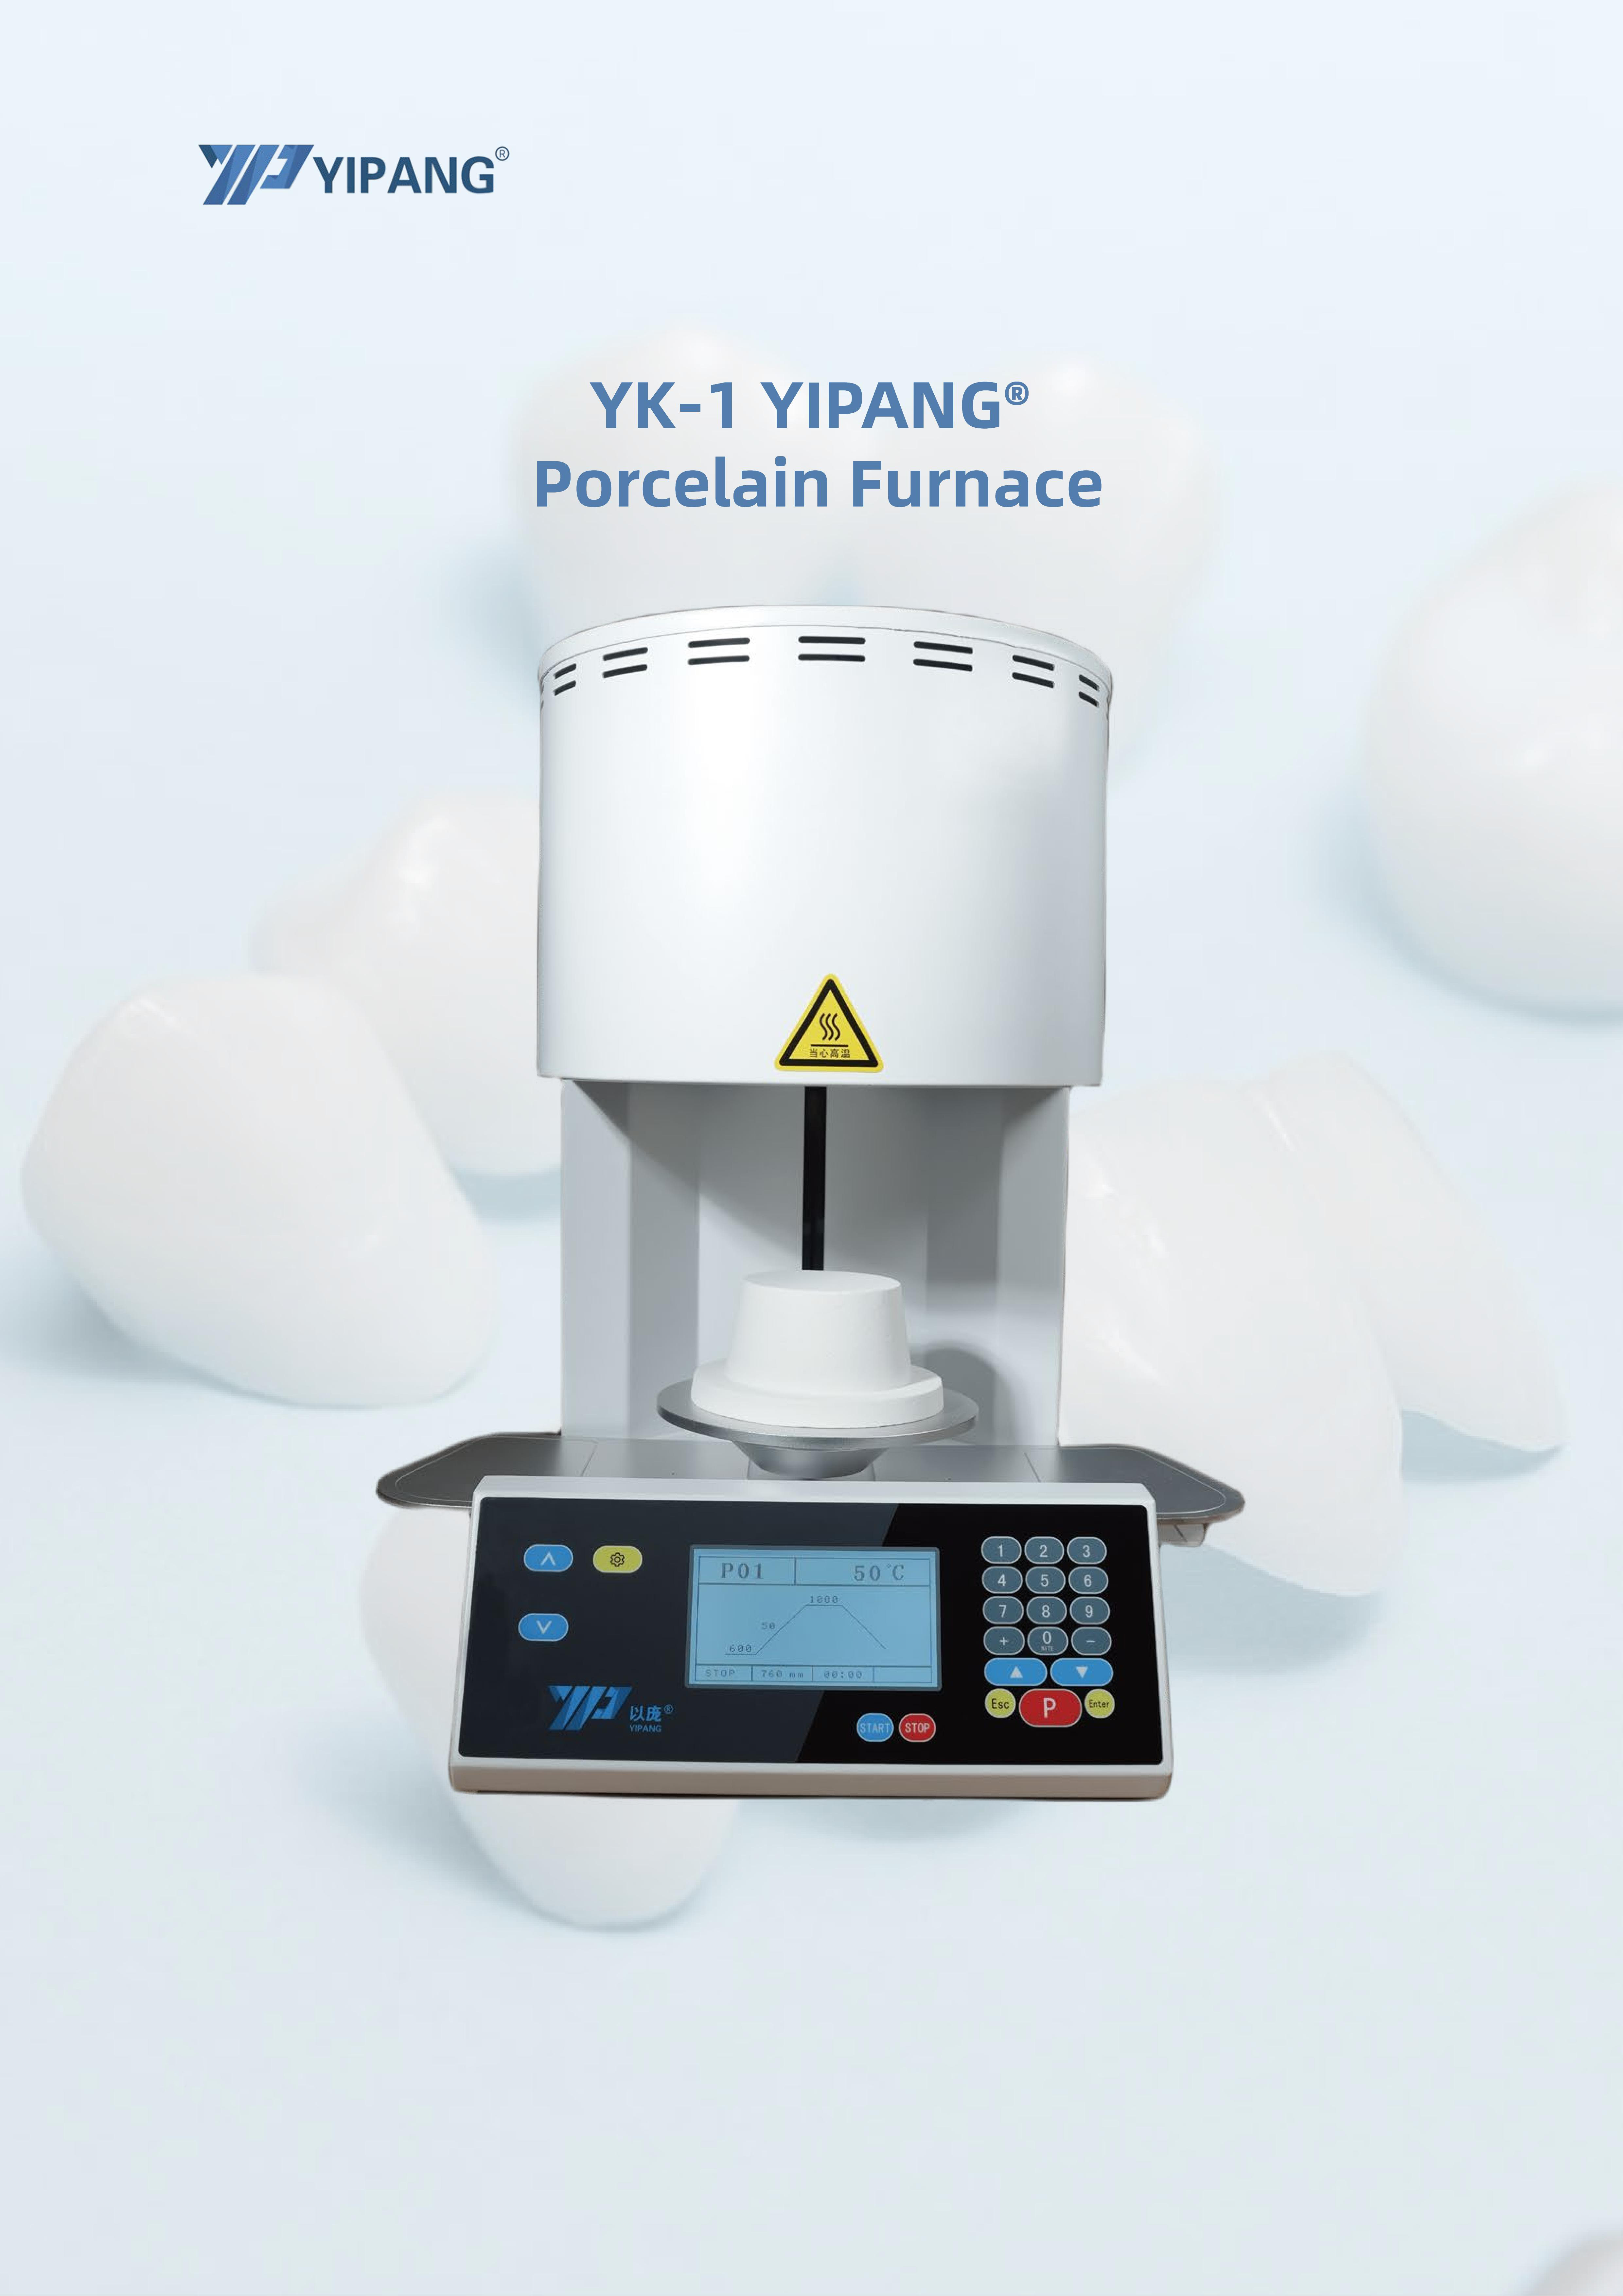 YIPANG® Porcelain Furnace – The Preferred Choice for Dental Professionals and Technicians